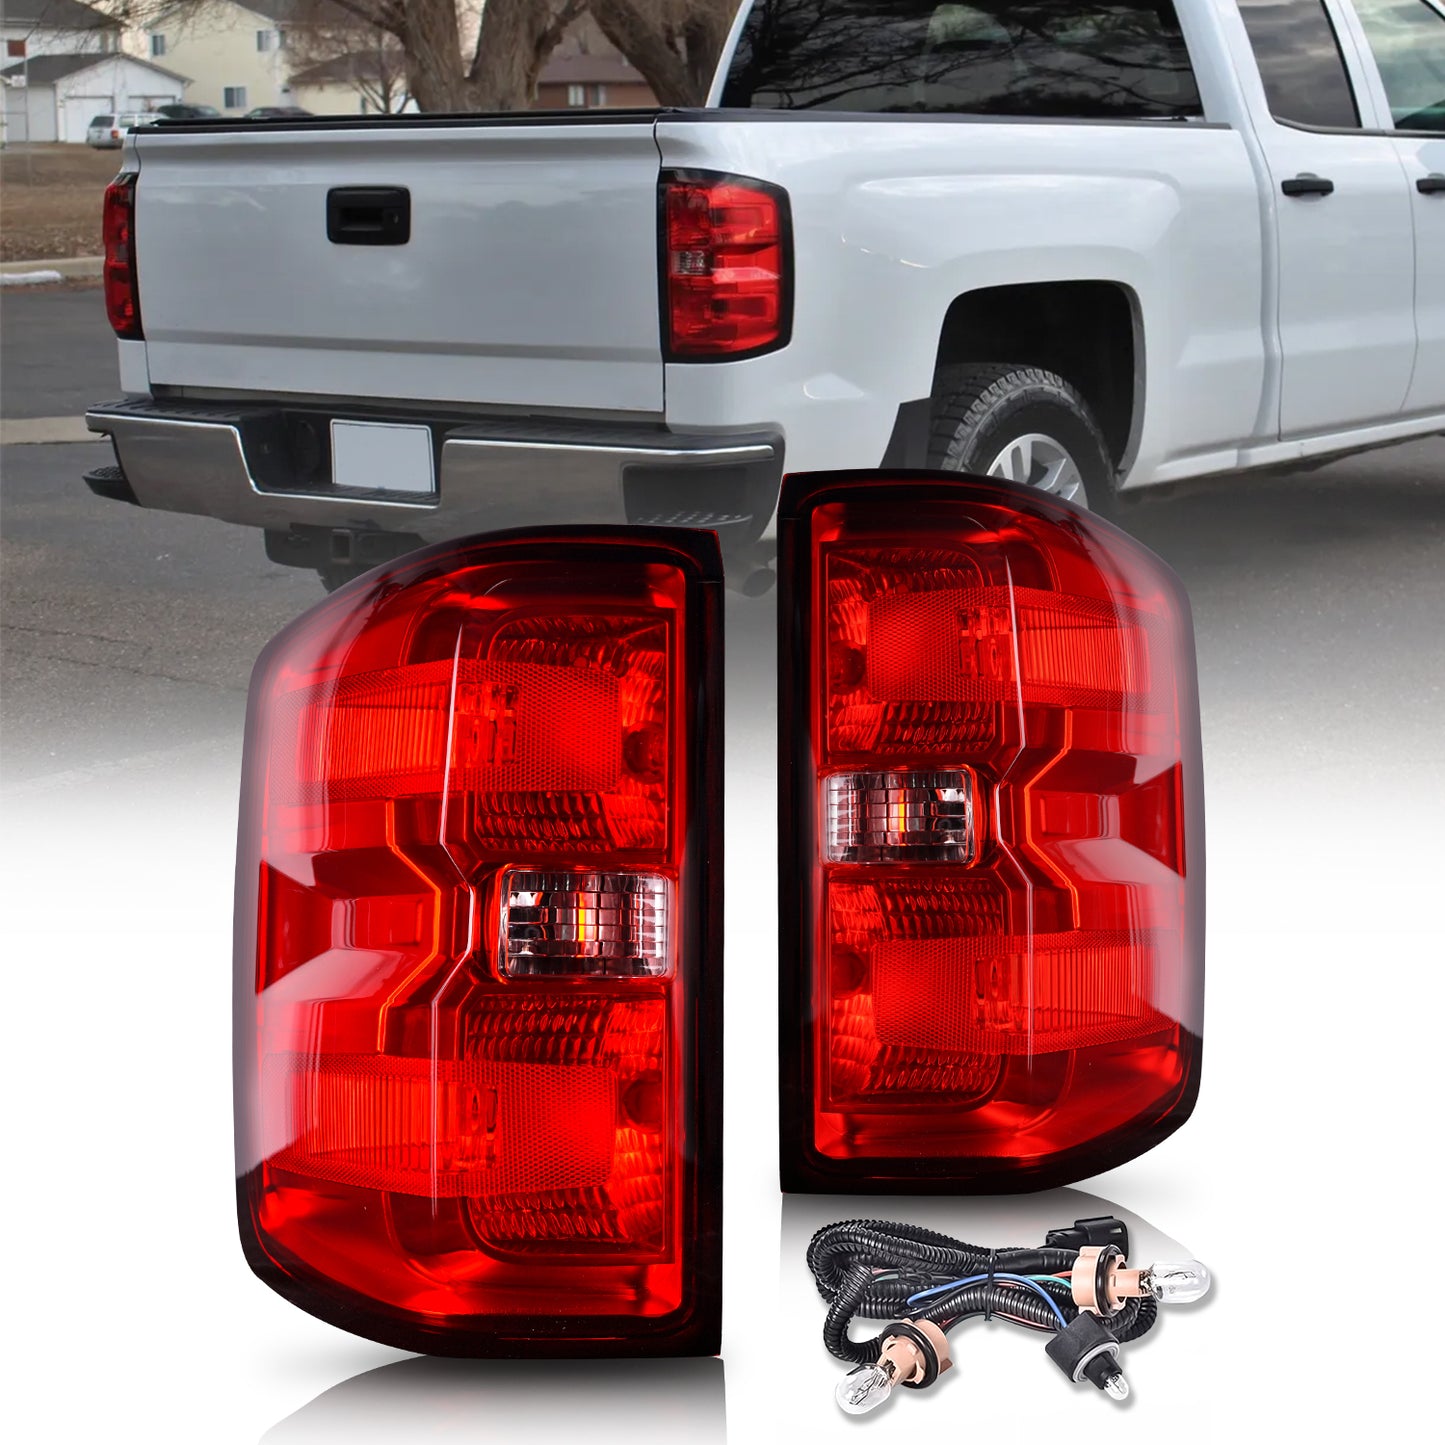 Tail Lights Assembly For Chevy Silverado 2014-2019/ GMC Sierra 2015-2019,OE style